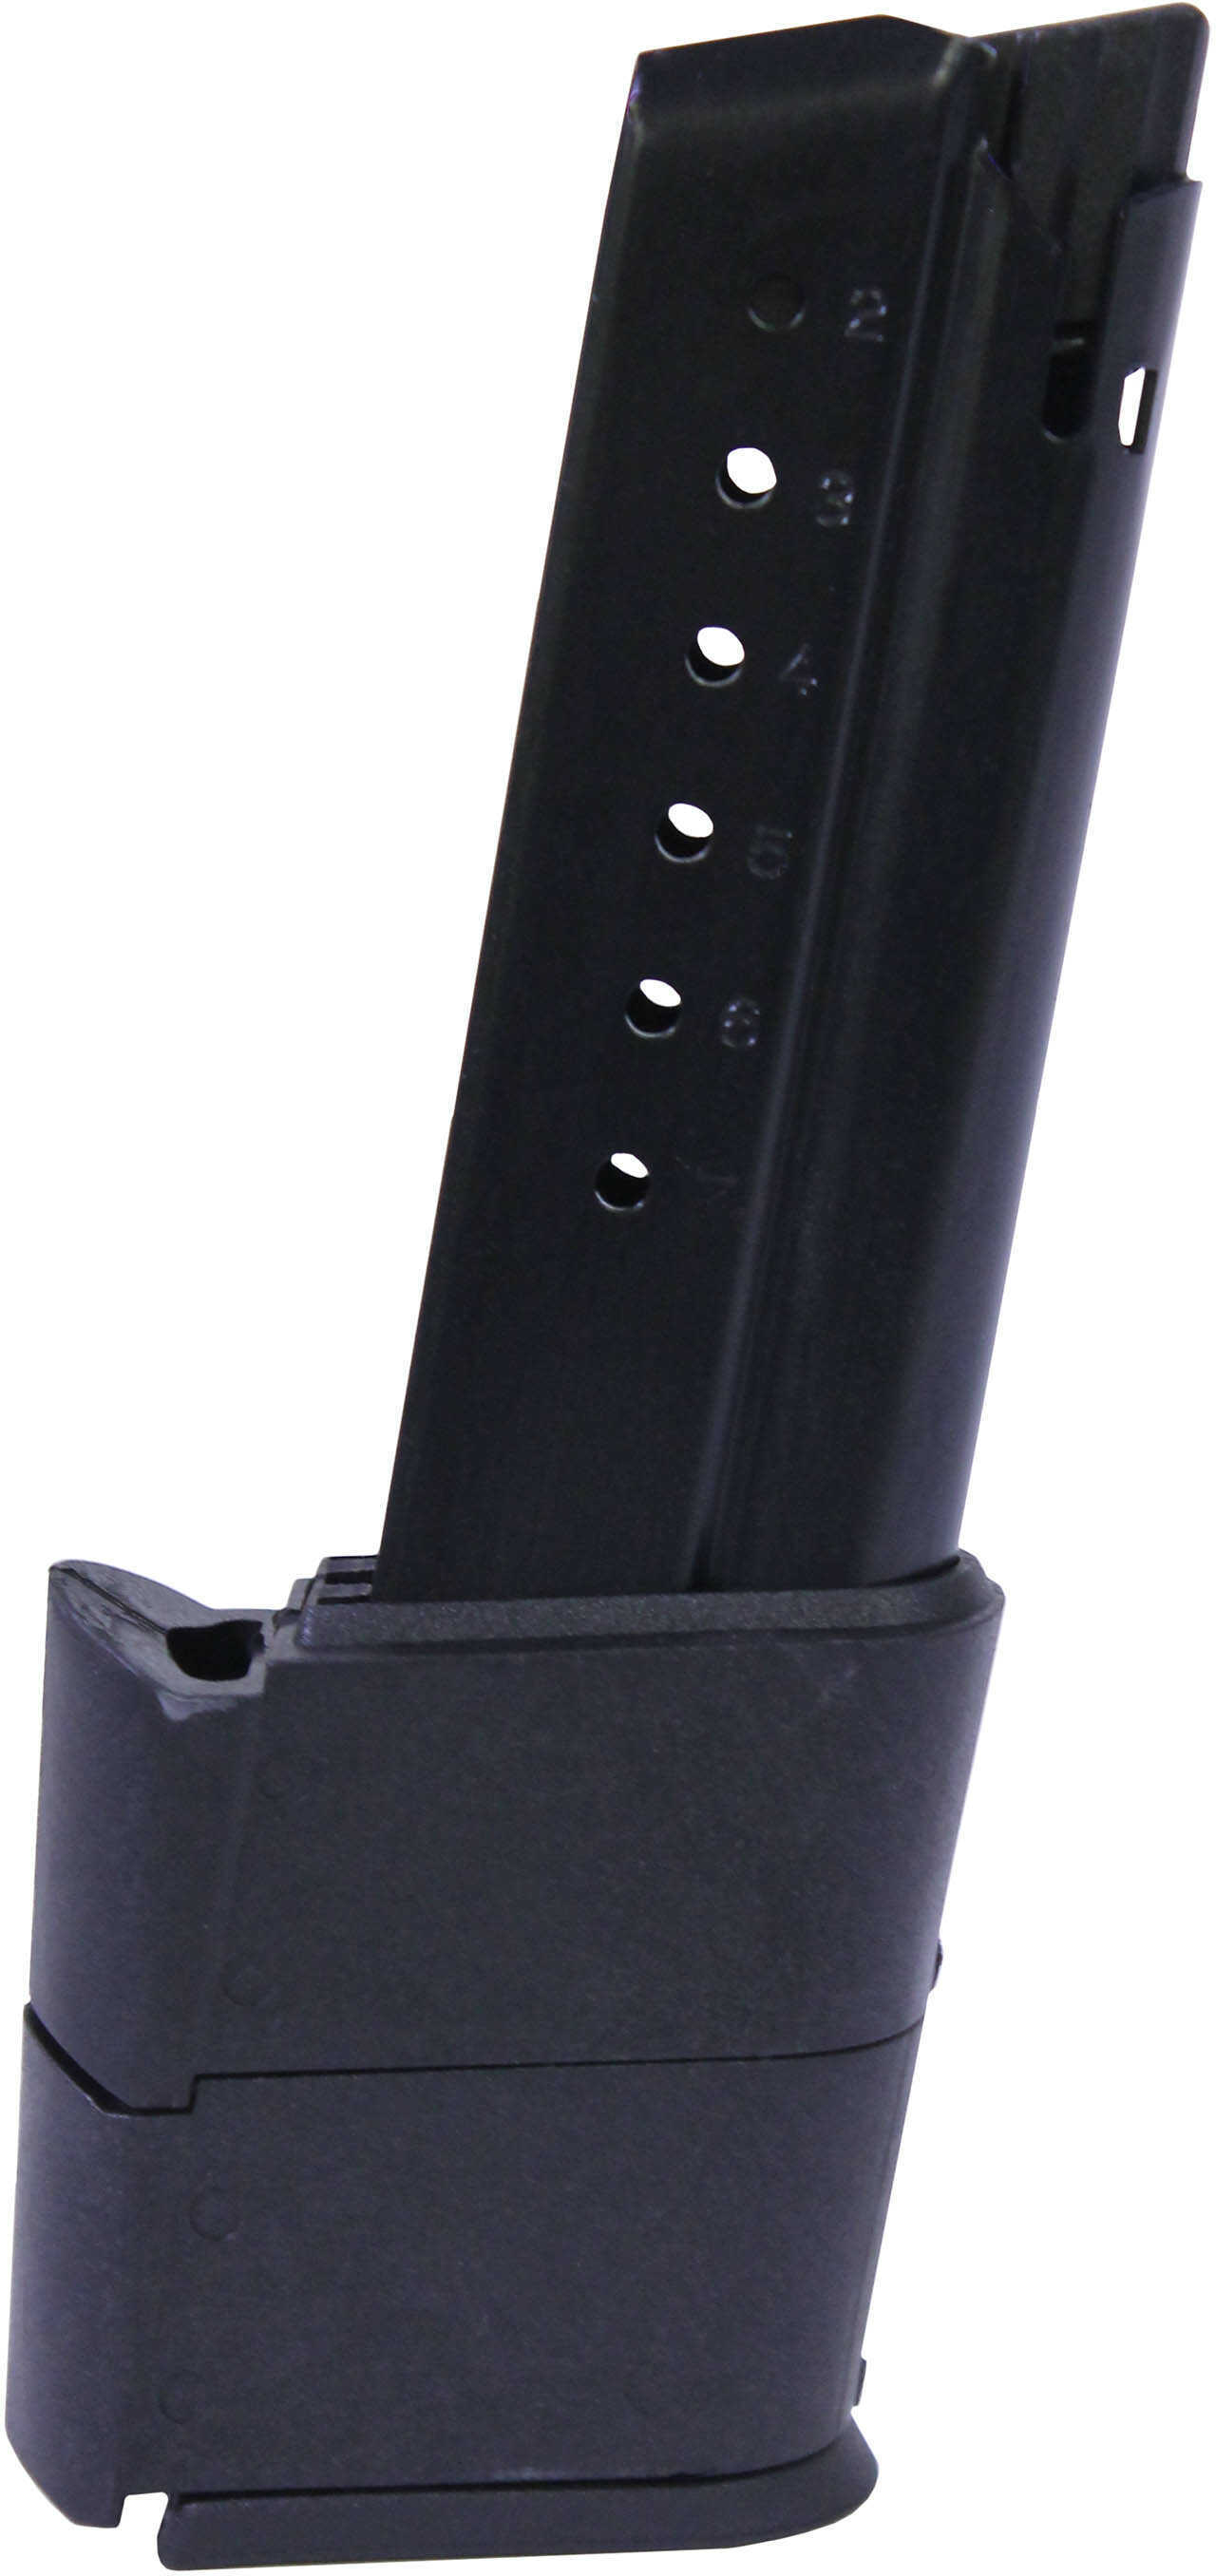 ProMag Pro SPRA15 XDS Mag 9MM 11Rd Steel